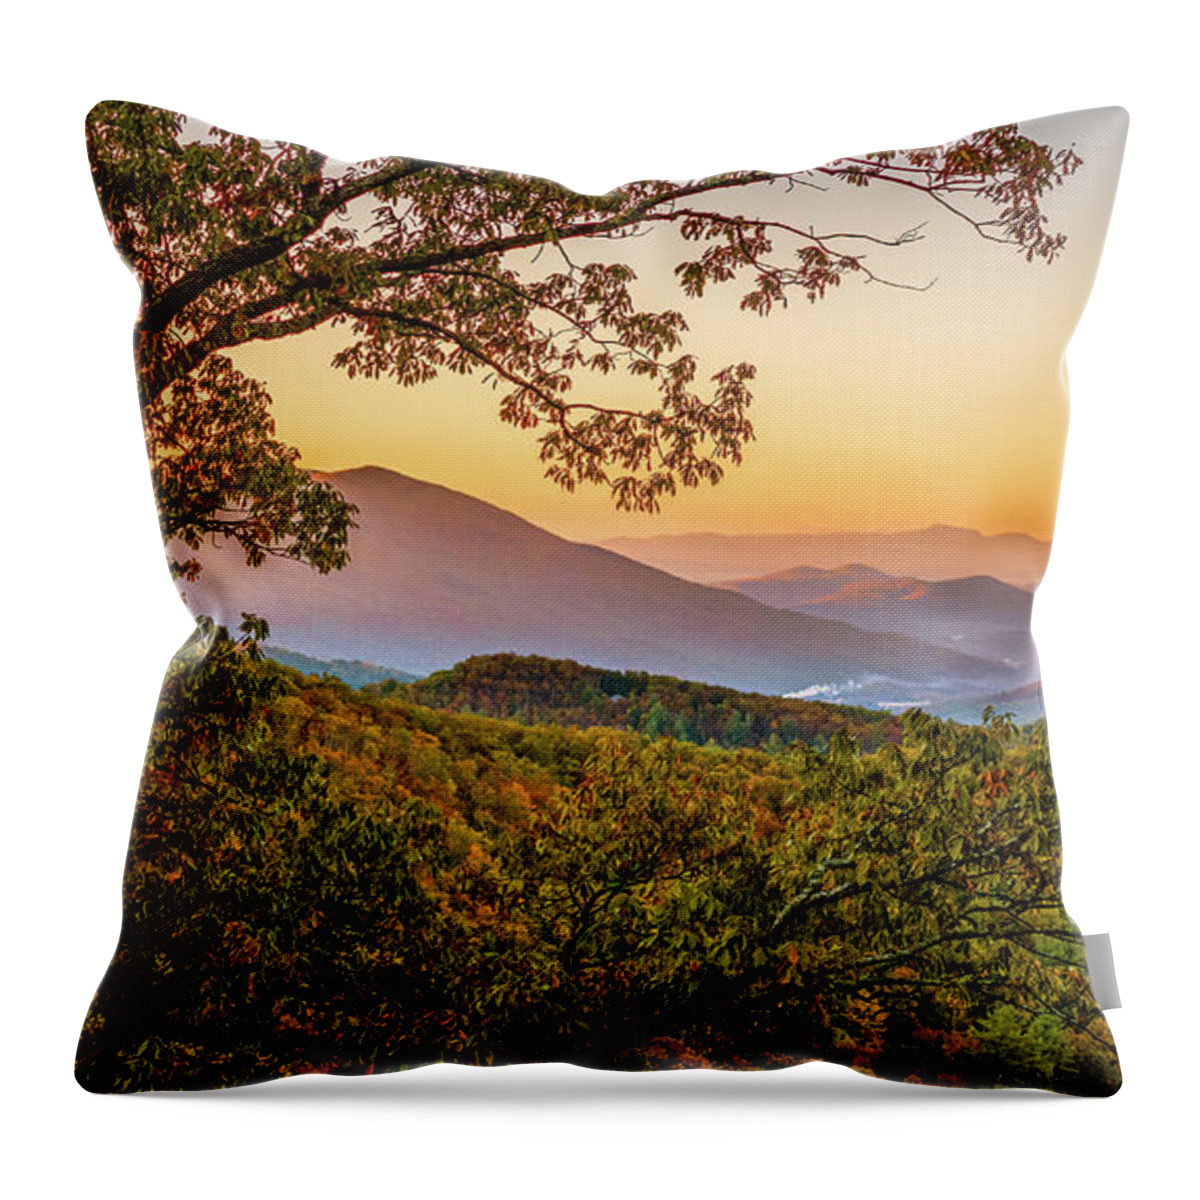 Landscape Throw Pillow featuring the photograph Waking Up Blue Ridge Parkway by Rachel Morrison